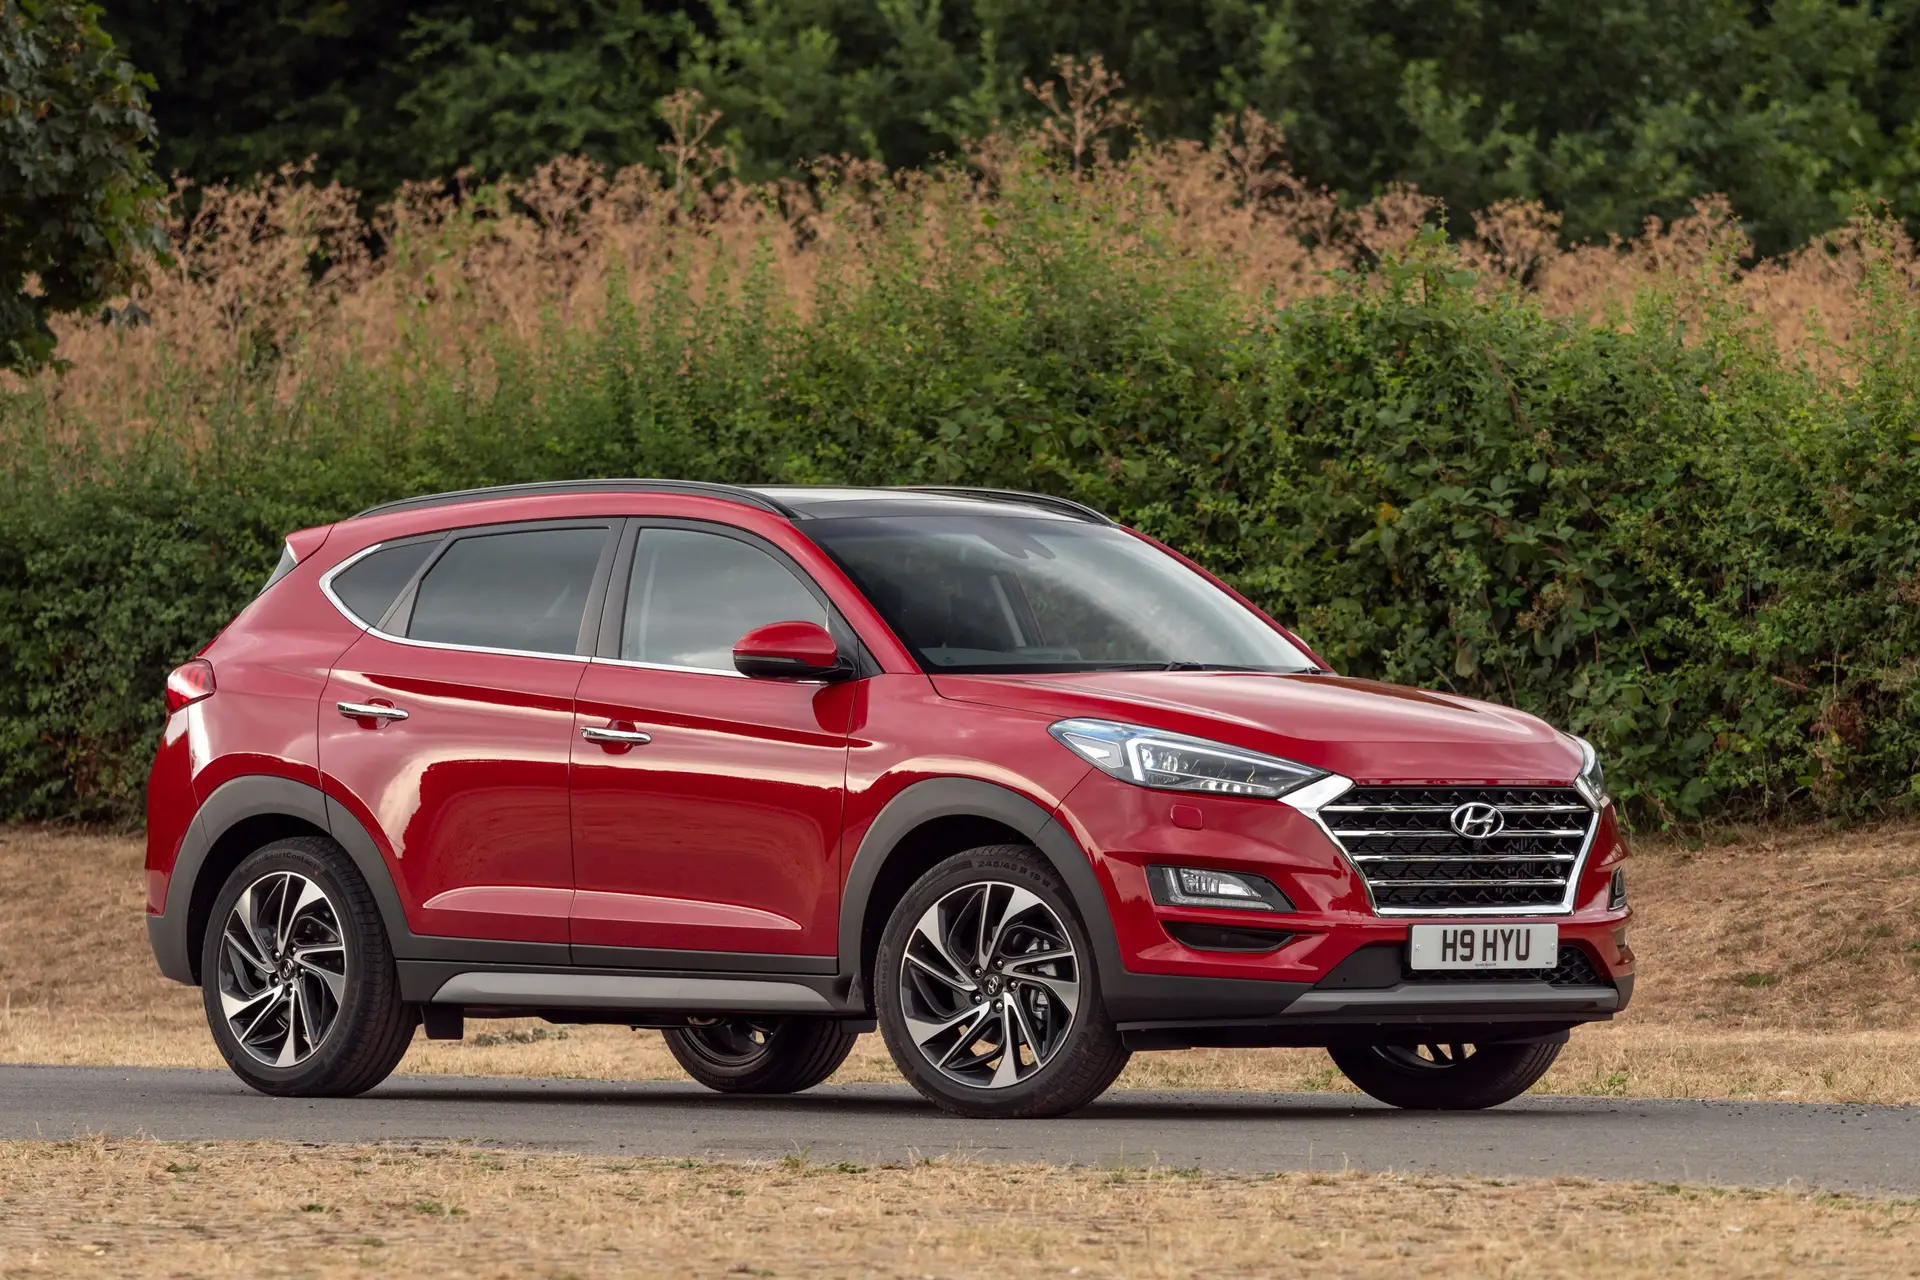 2019 Hyundai Tucson: Affordable Luxury You Can Actually Use